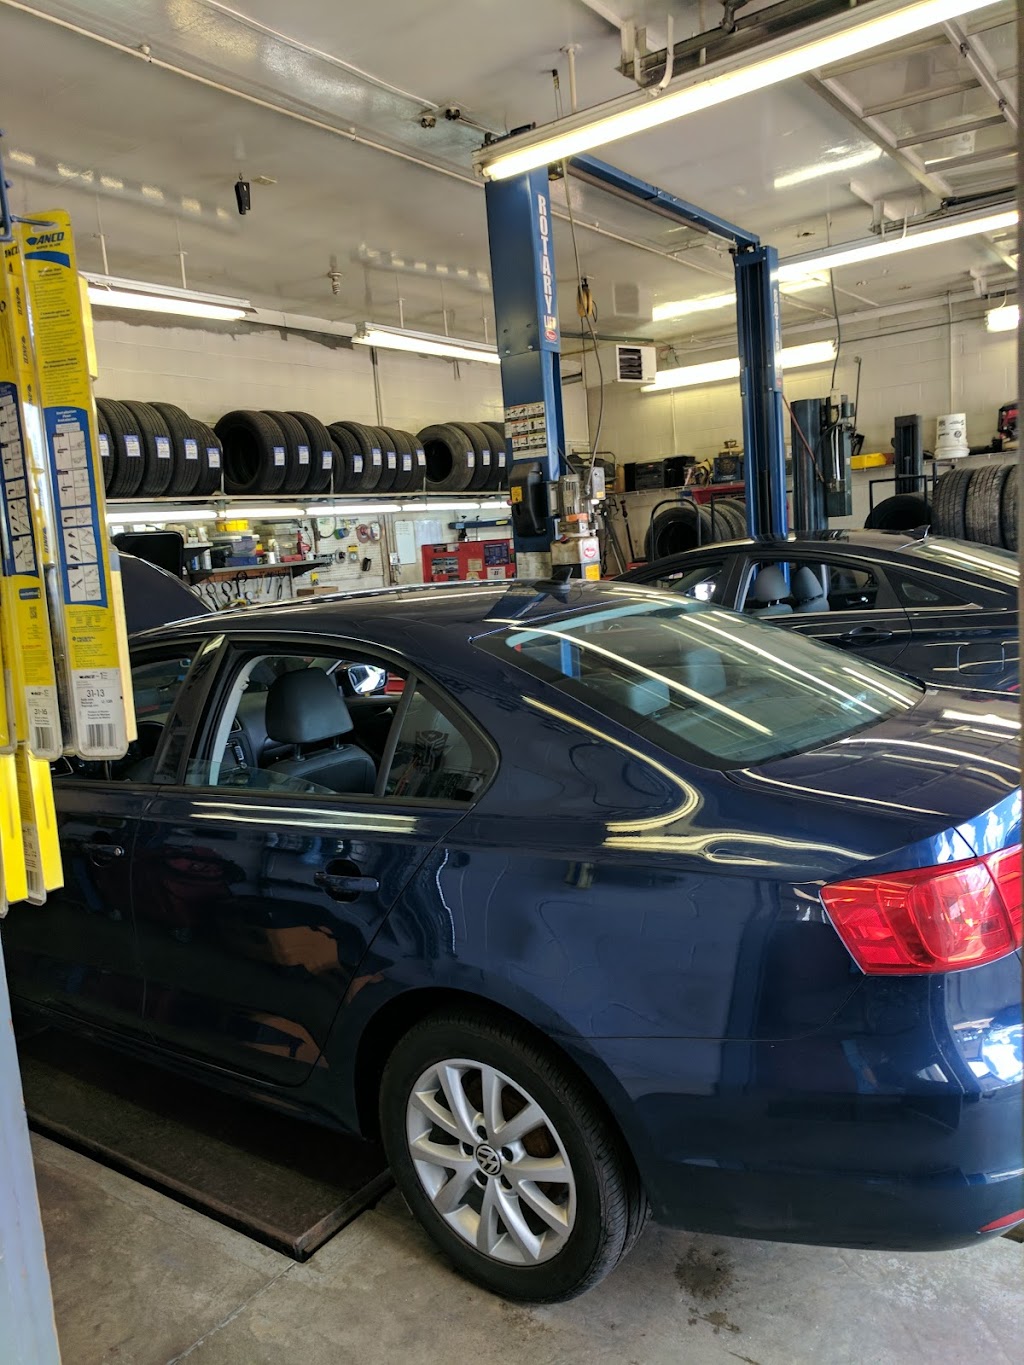 Bishops Auto Sales & Services | 131 Berlin Rd, Cromwell, CT 06416 | Phone: (860) 635-0802